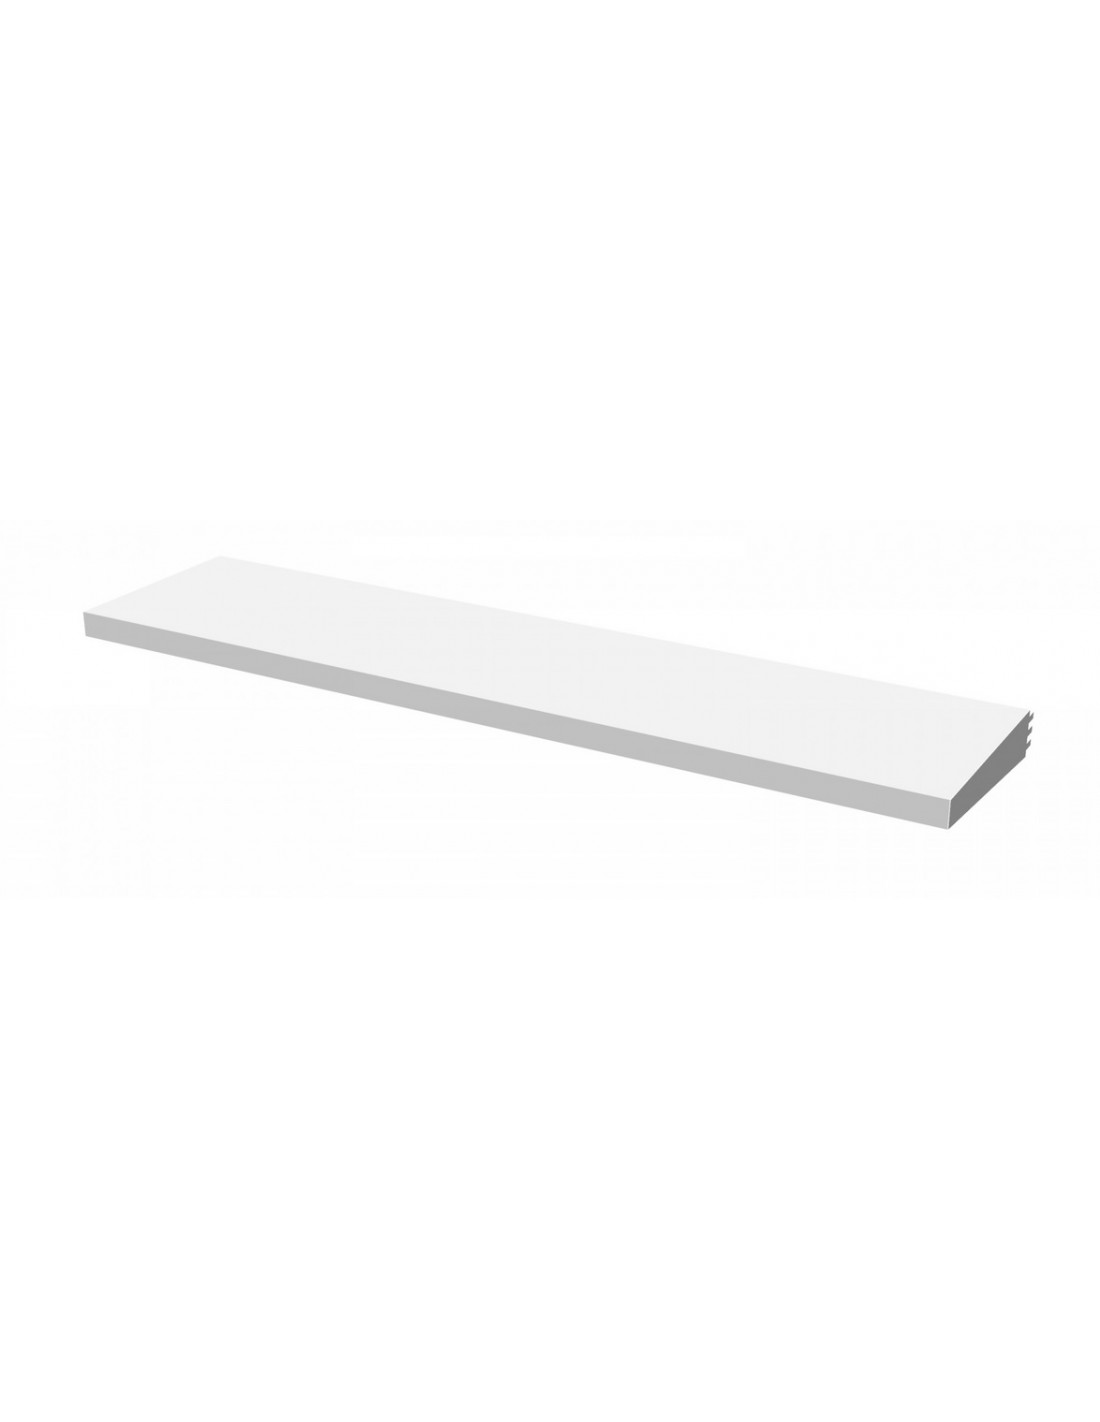 Additional shelf in 200 cm white painted sheet - For mod. VOLCANO 80